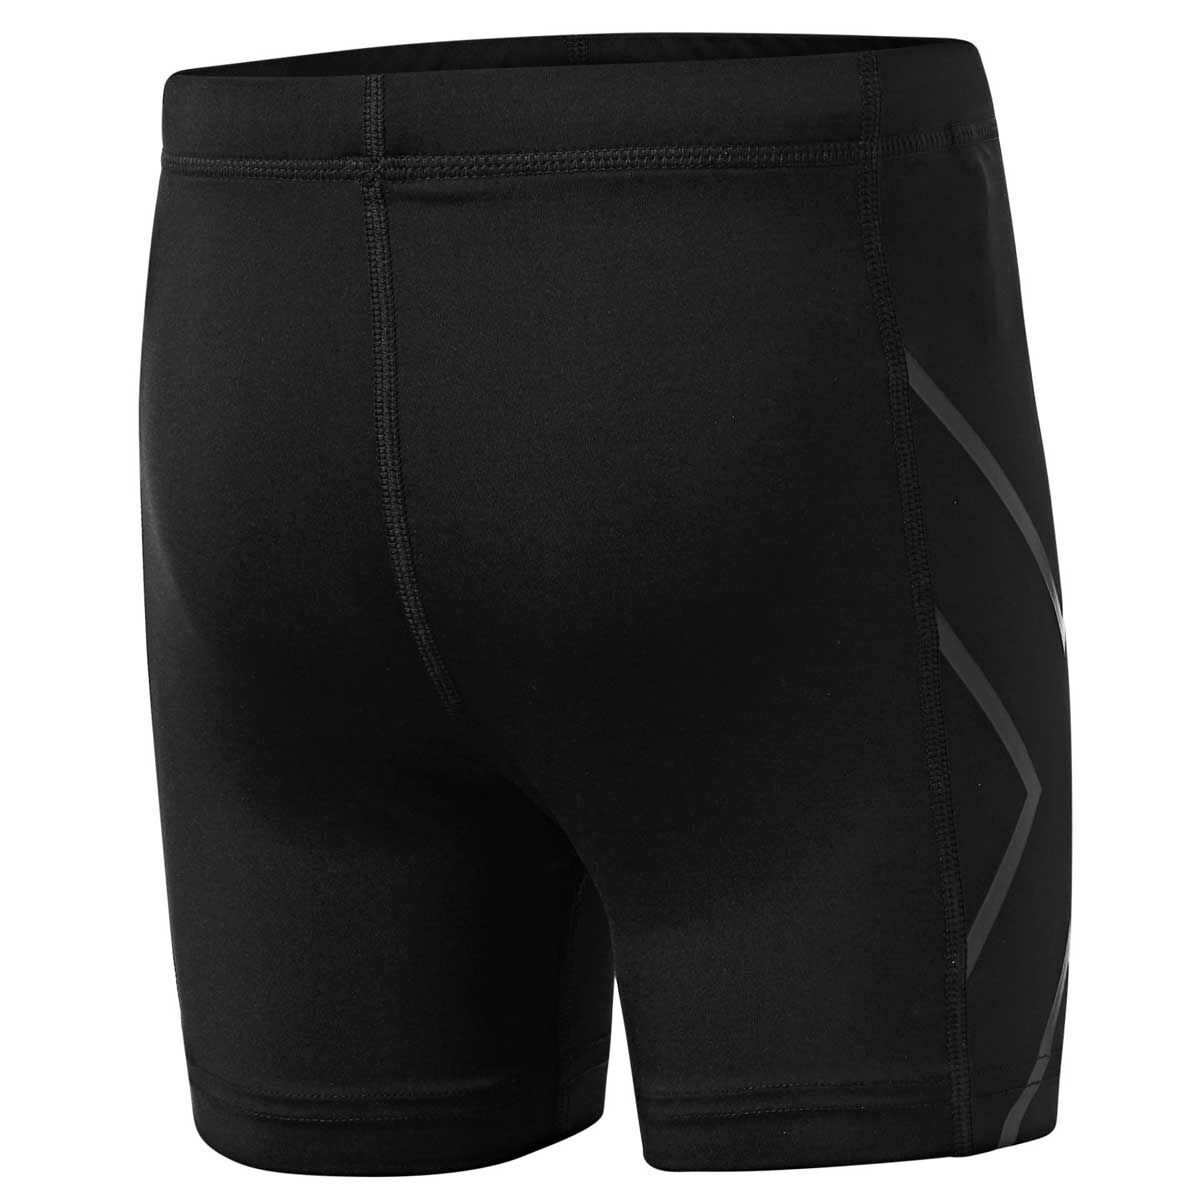 3 Reasons to Wear Compression Shorts to the Gym – Trinity